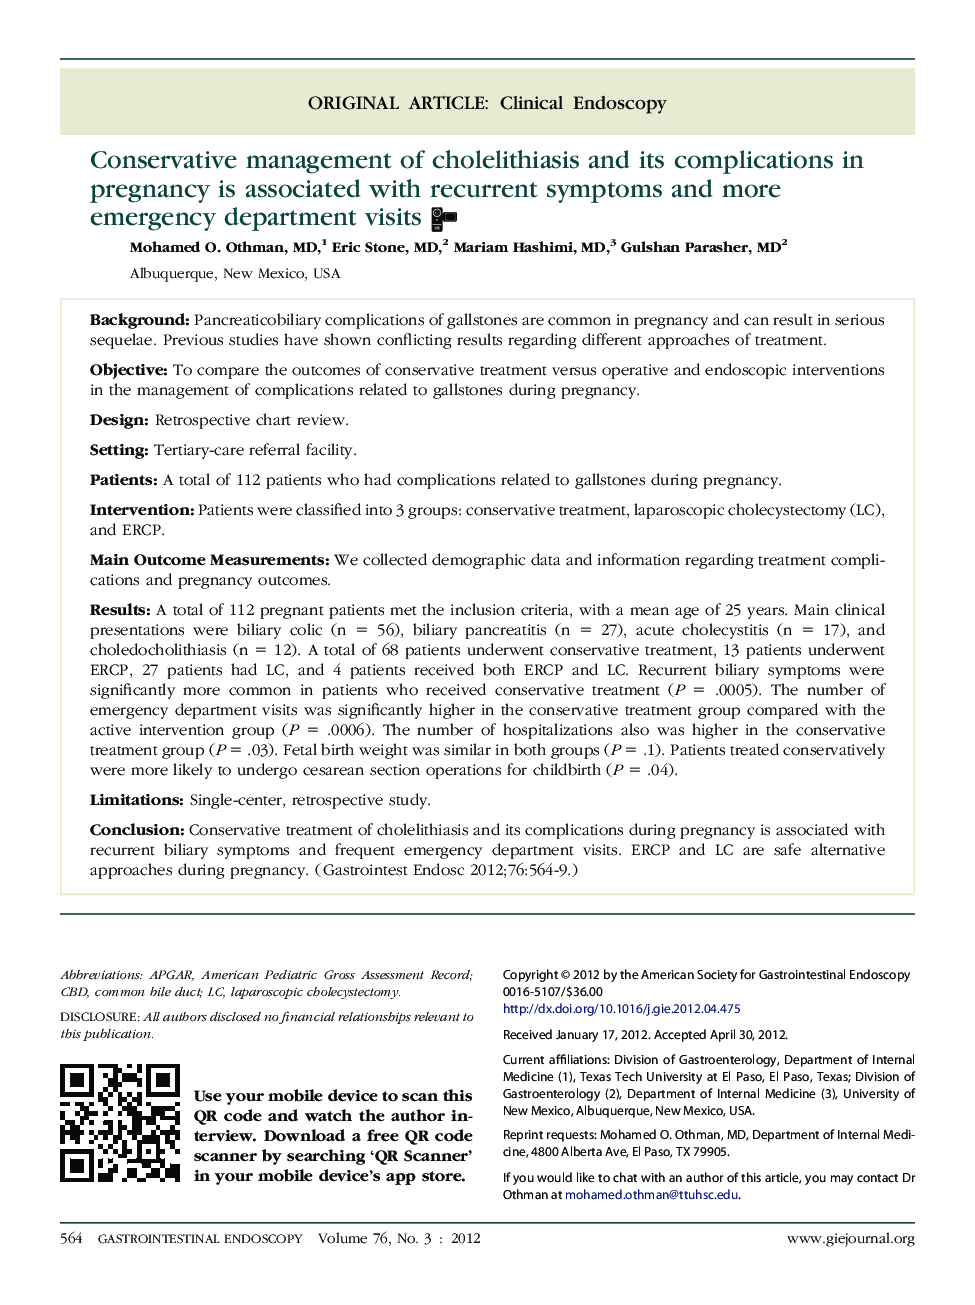 Conservative management of cholelithiasis and its complications in pregnancy is associated with recurrent symptoms and more emergency department visits 